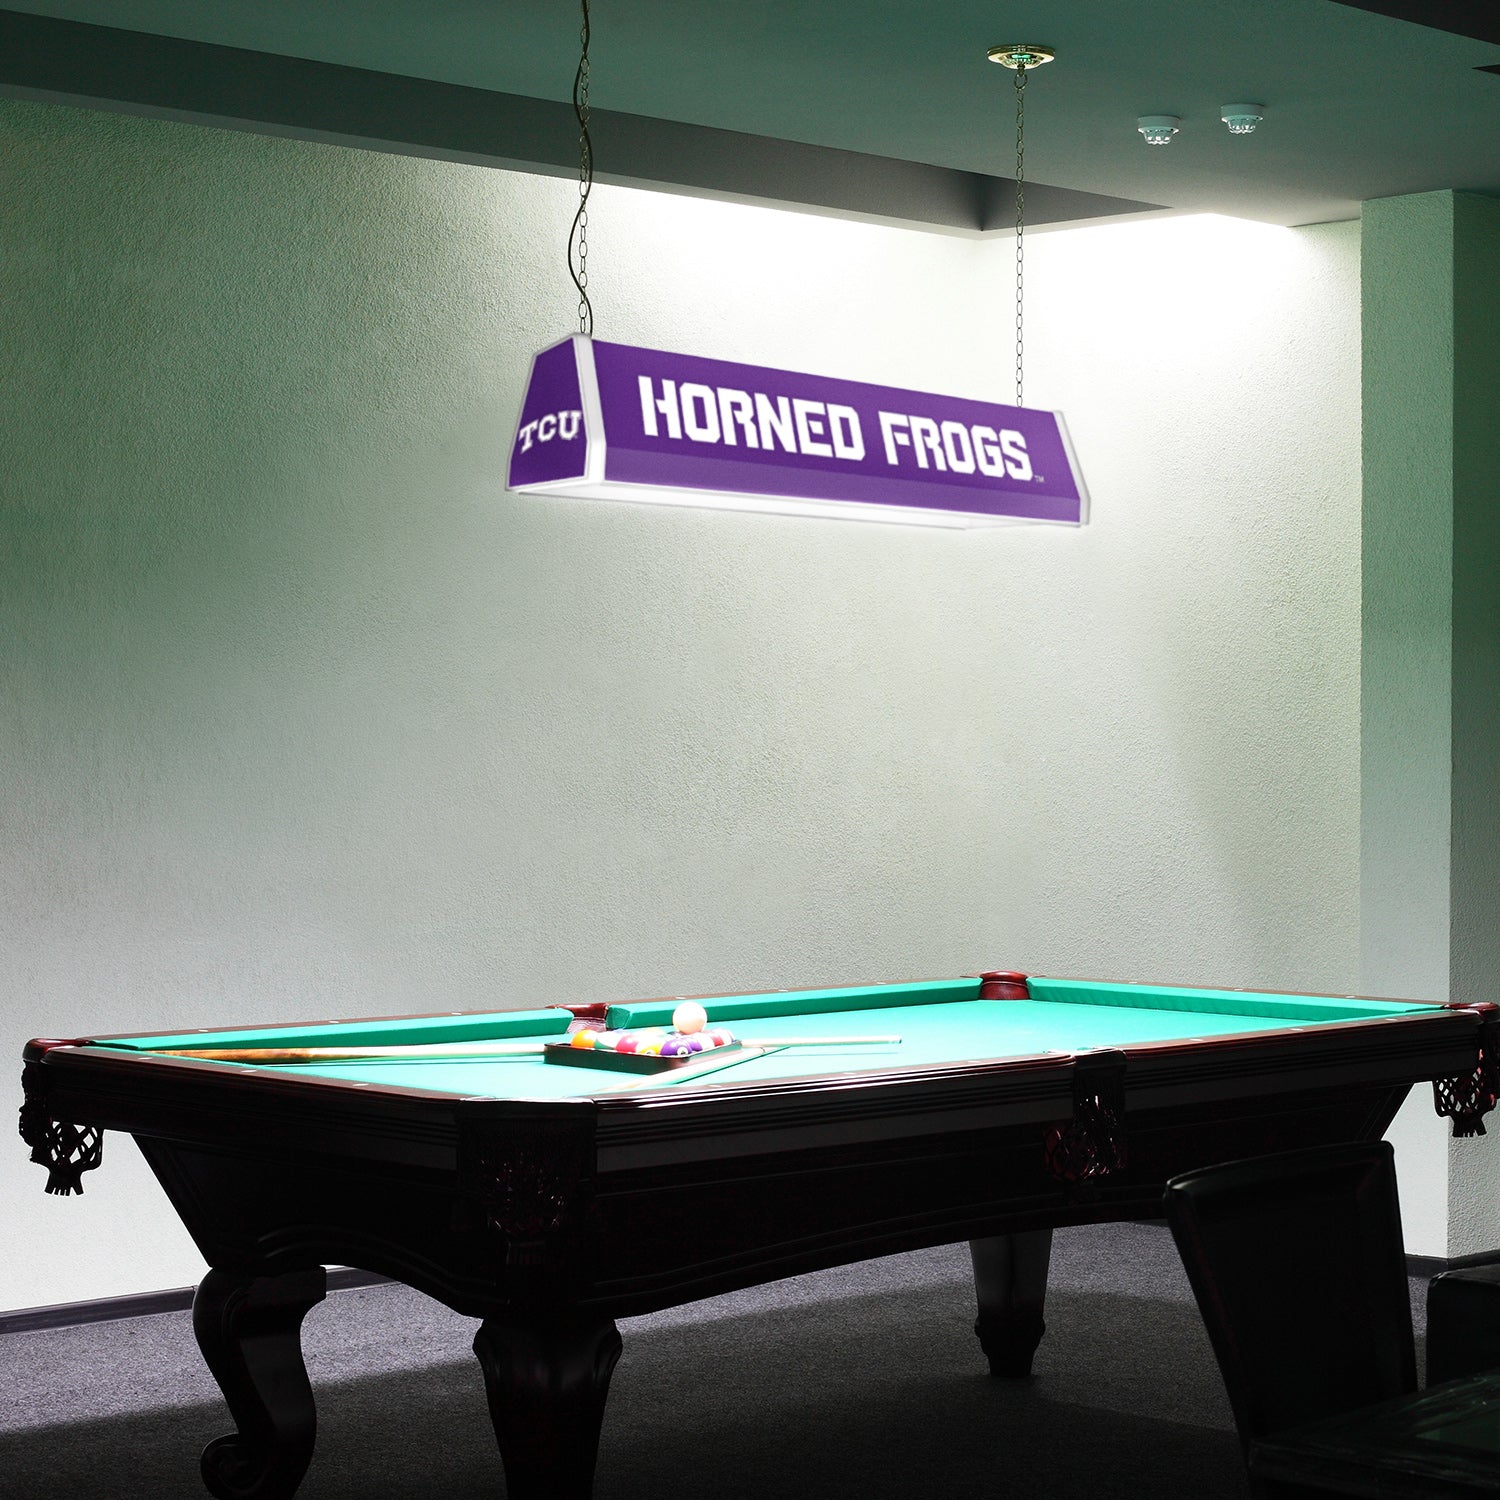 TCU Horned Frogs Standard Pool Table Light Room View